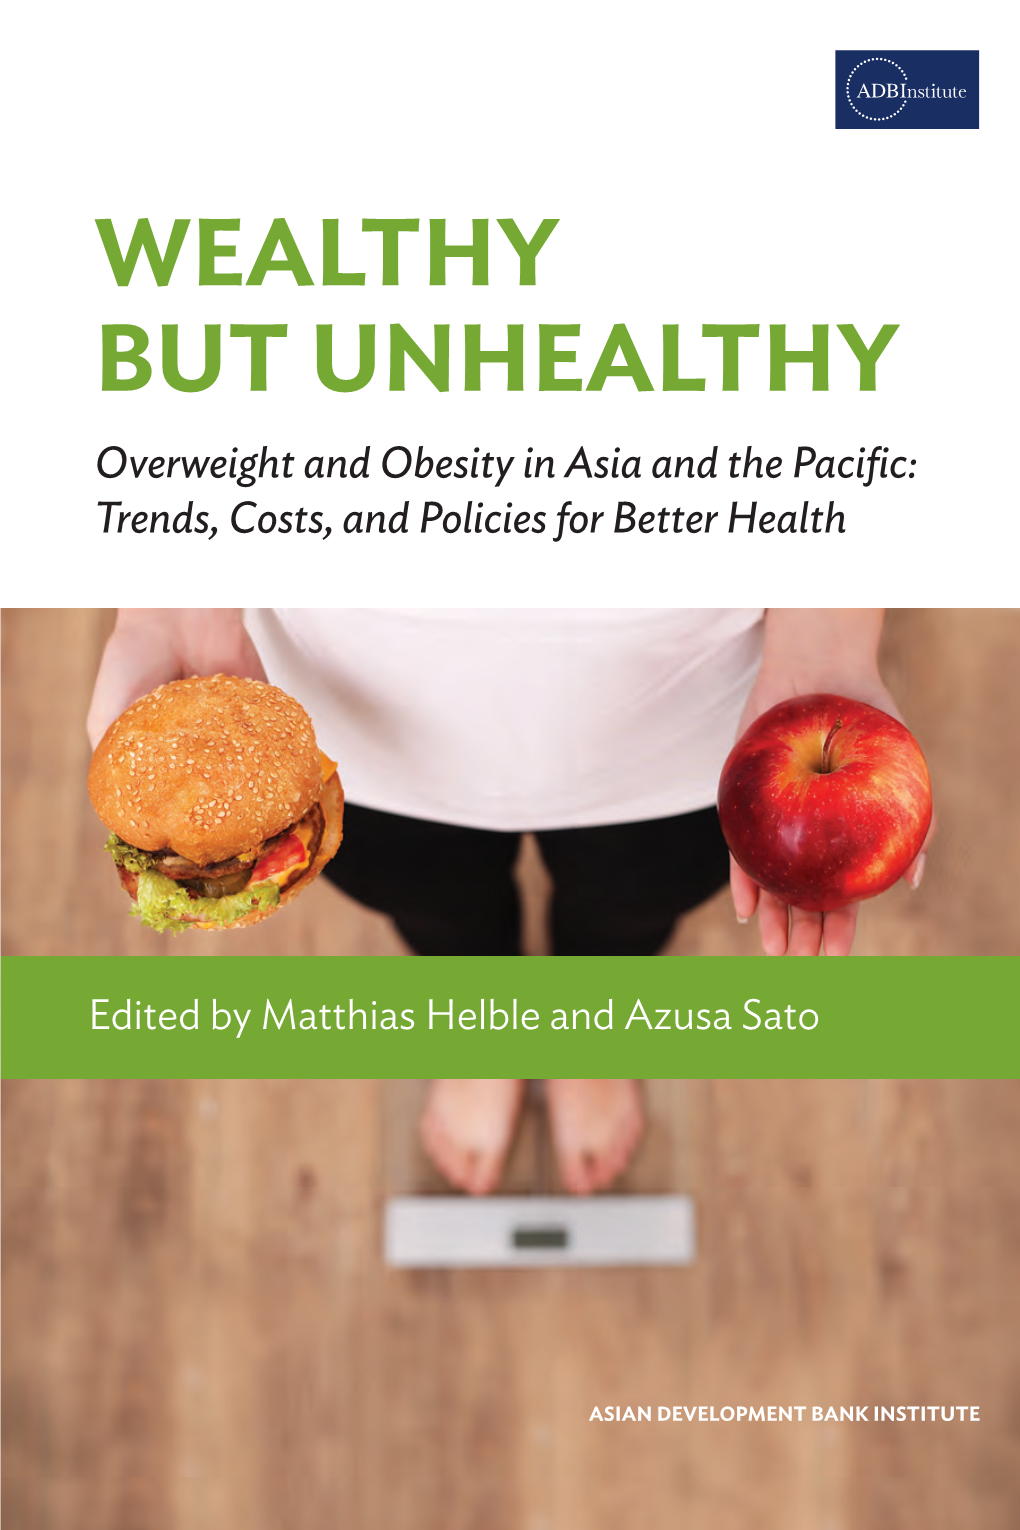 Wealthy but Unhealthy: Overweight and Obesity in Asia and the Pacific: Trends, Costs, and Policies for Better Health